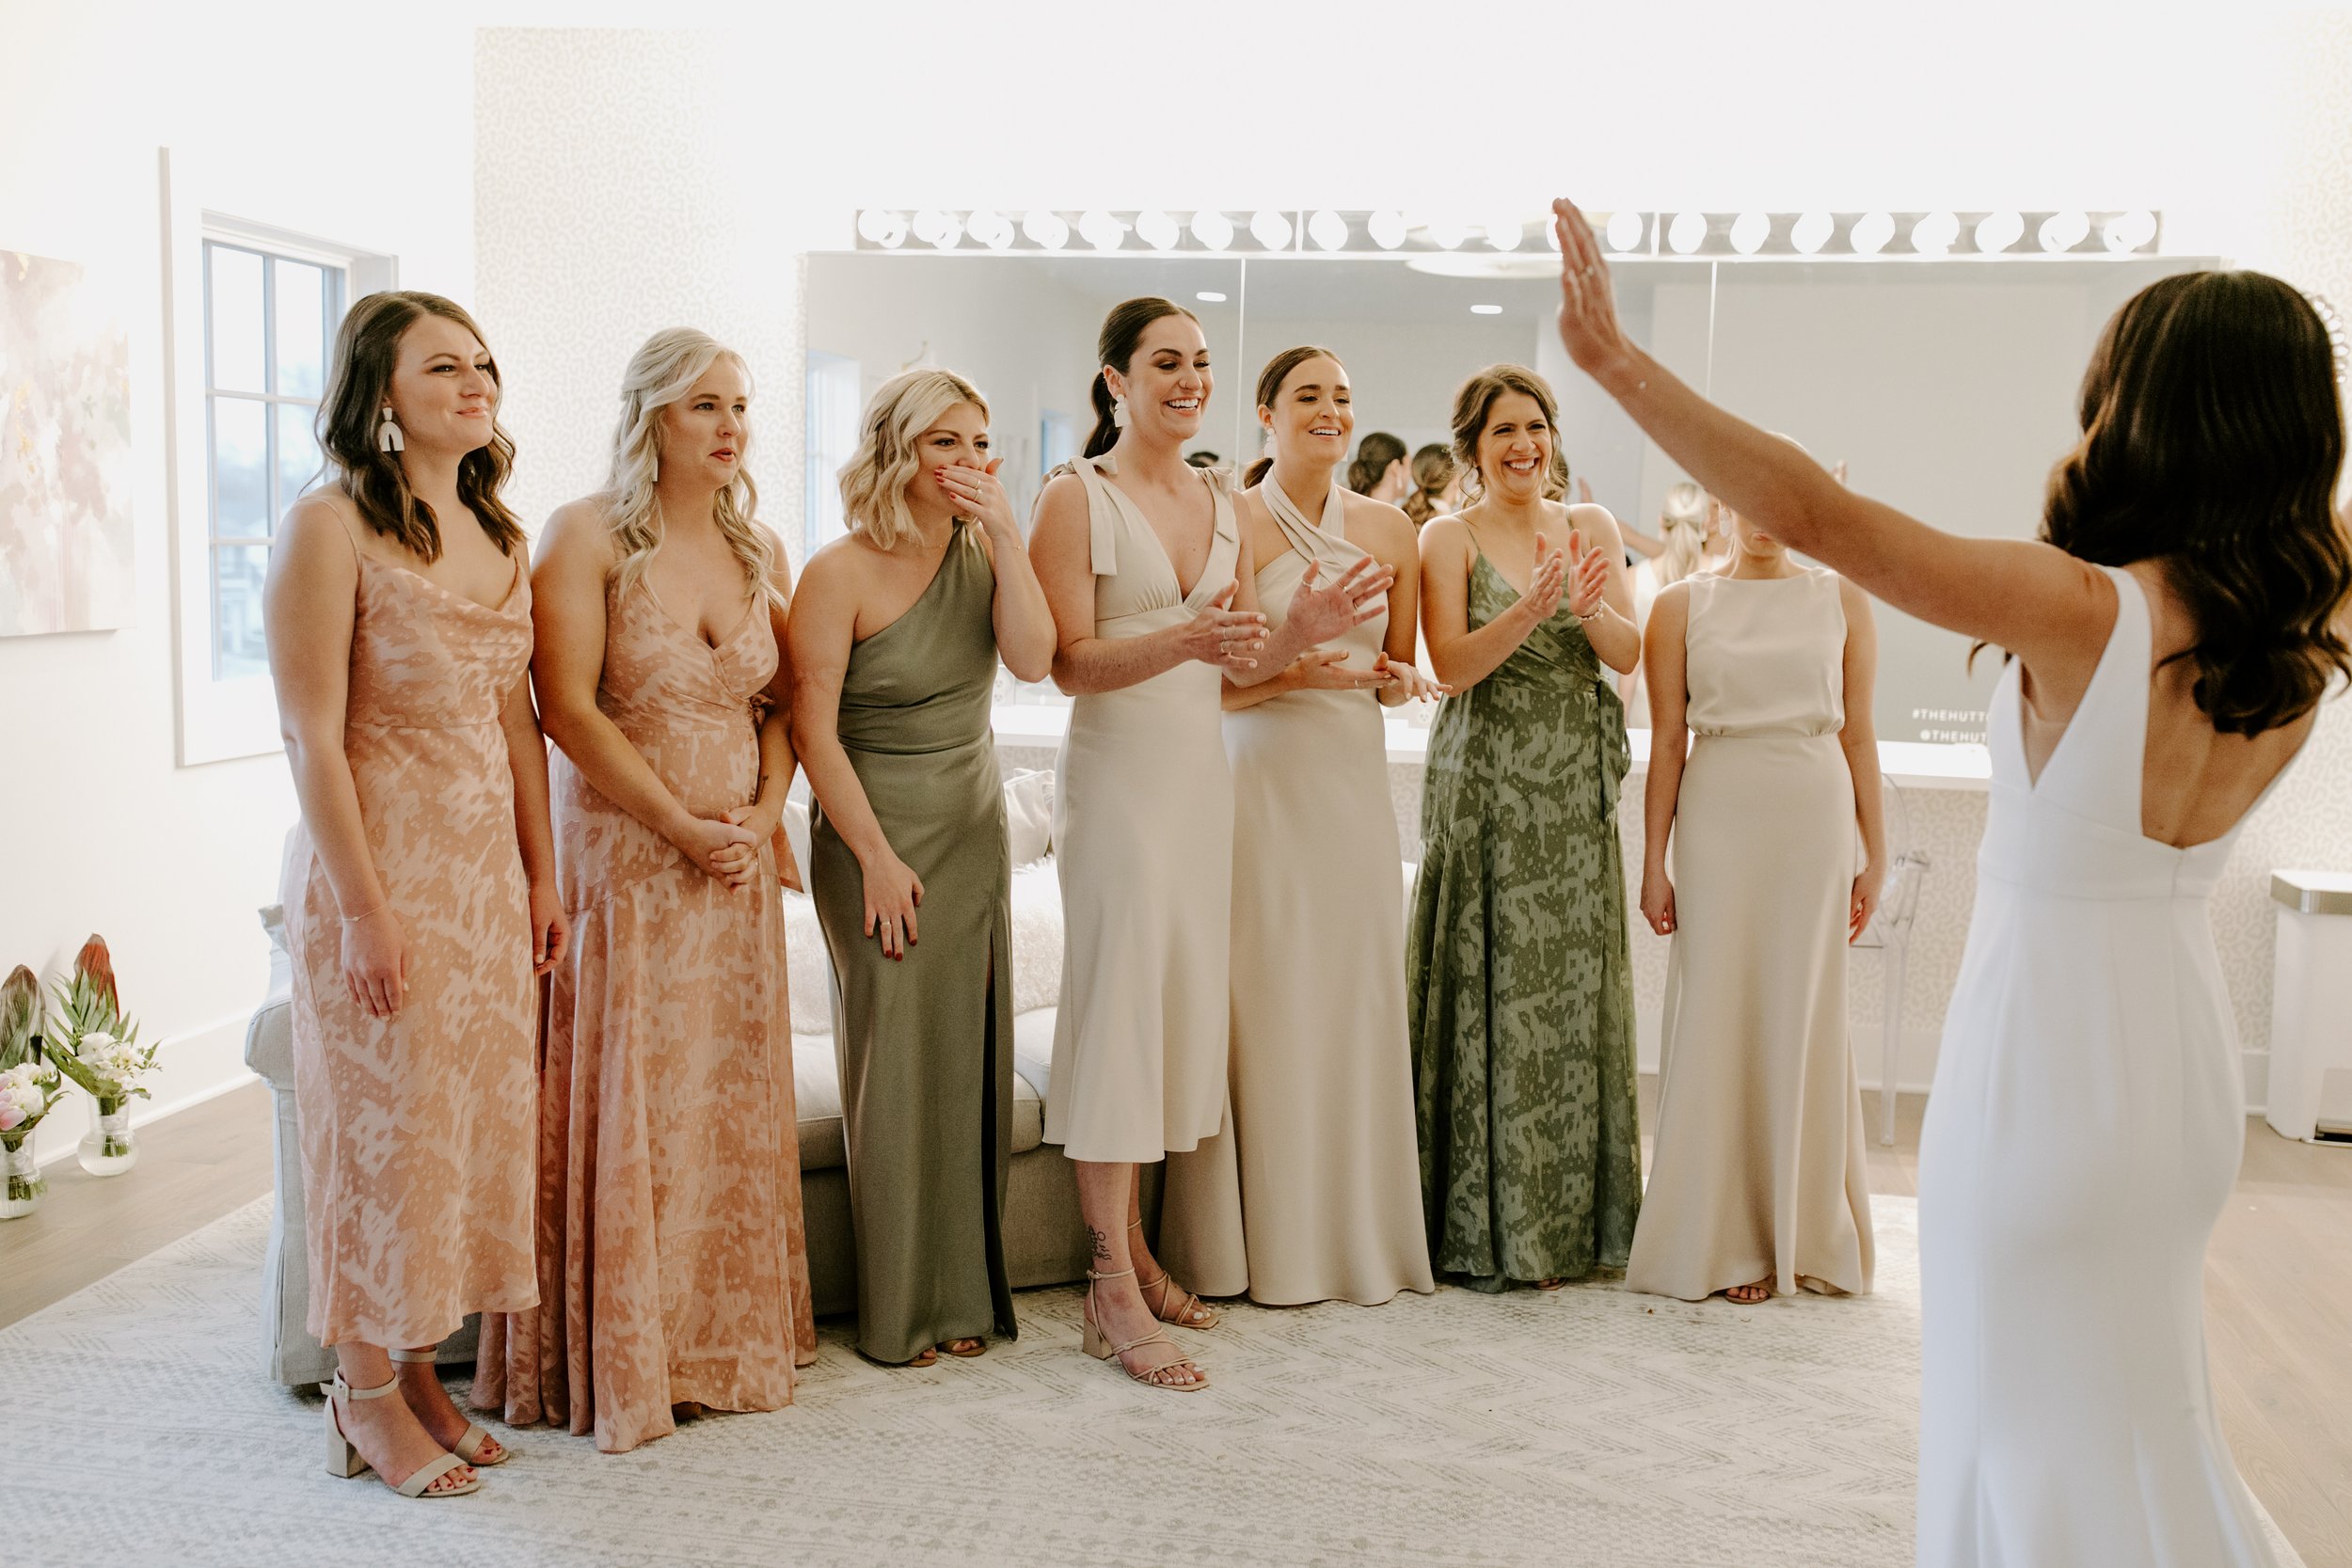 the bride and her neutral tone bridesmaids in thier first look pictures